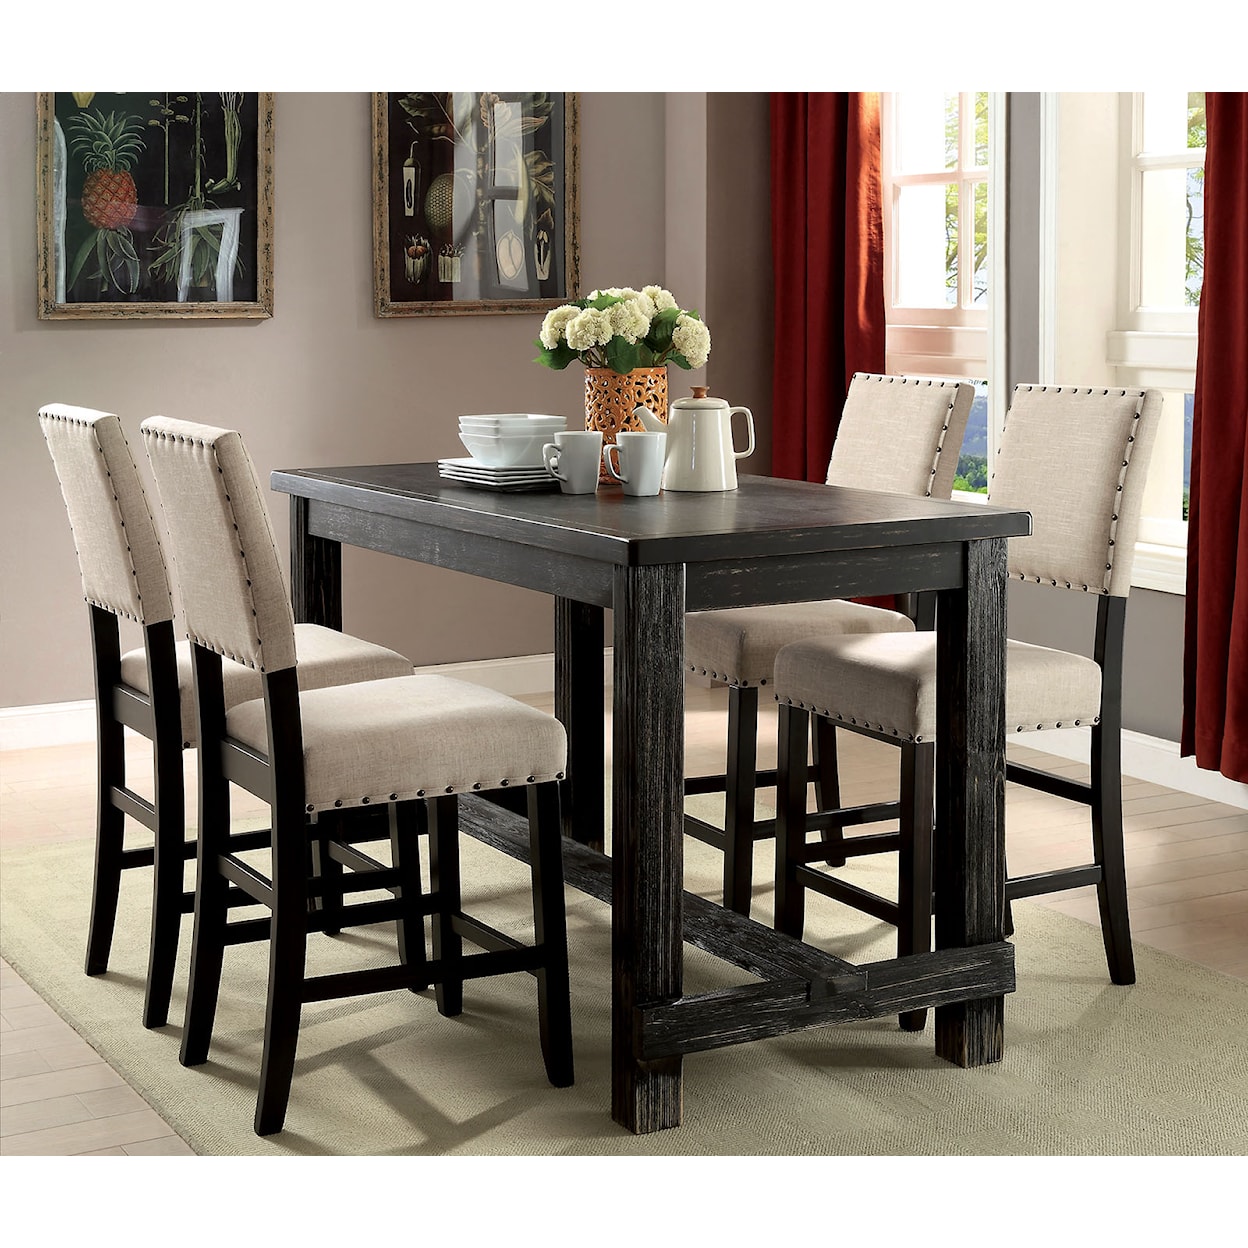 Furniture of America Sania 5-Piece Counter Height Table Set